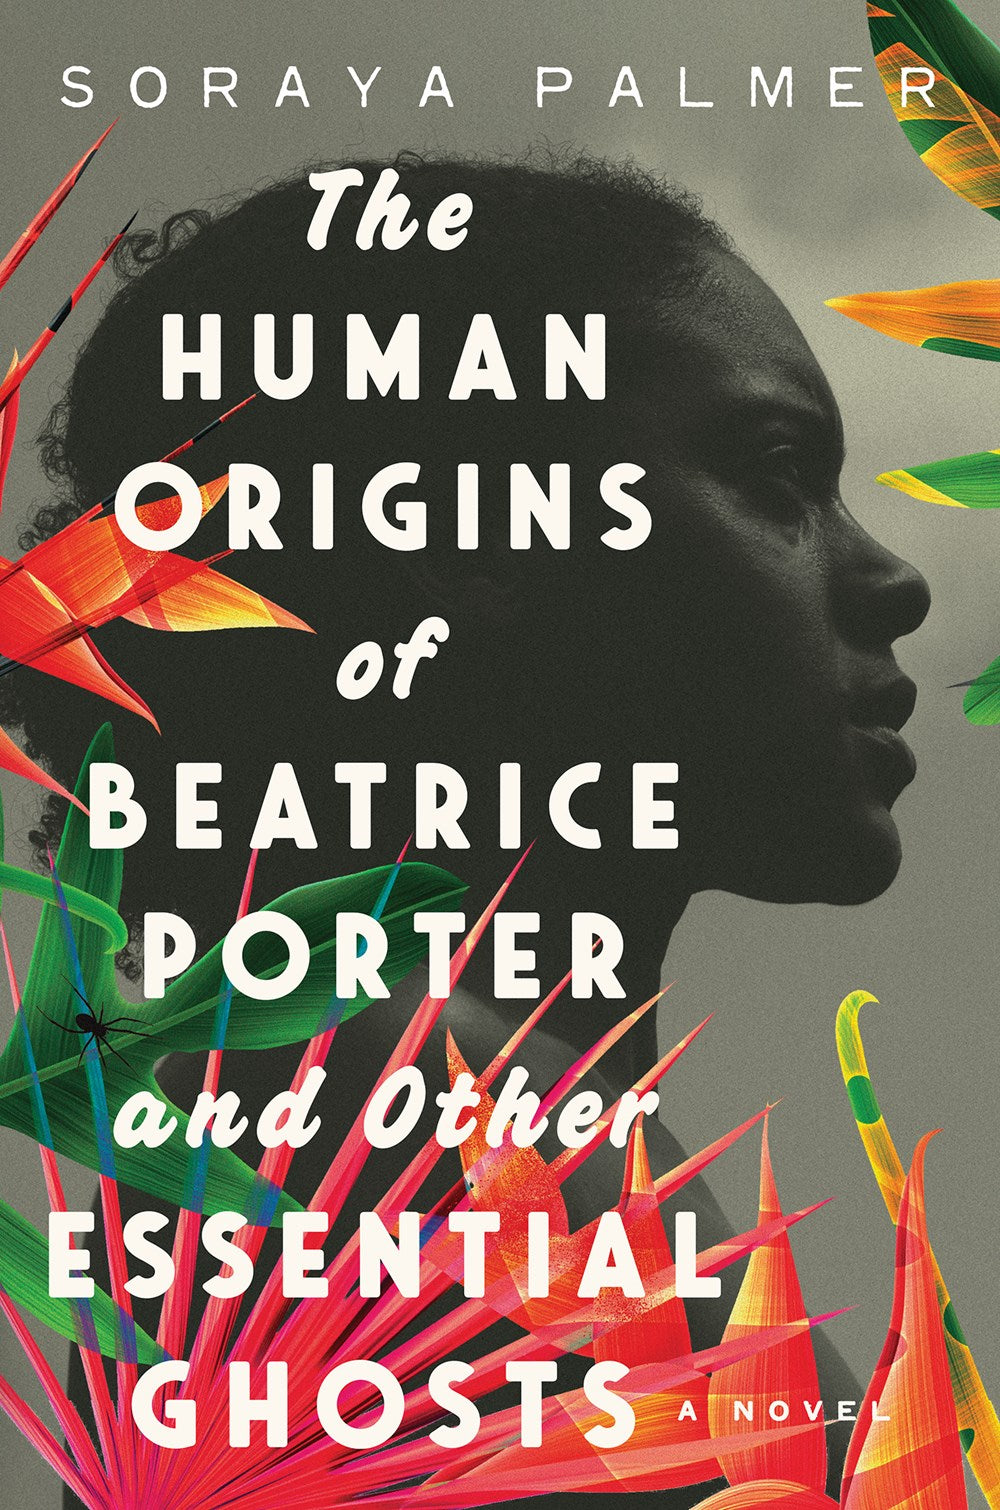 Origins　Porter　Human　Beatrice　The　Other　Stories　Essential　Nov　Ghosts:　A　–　Kindred　of　and